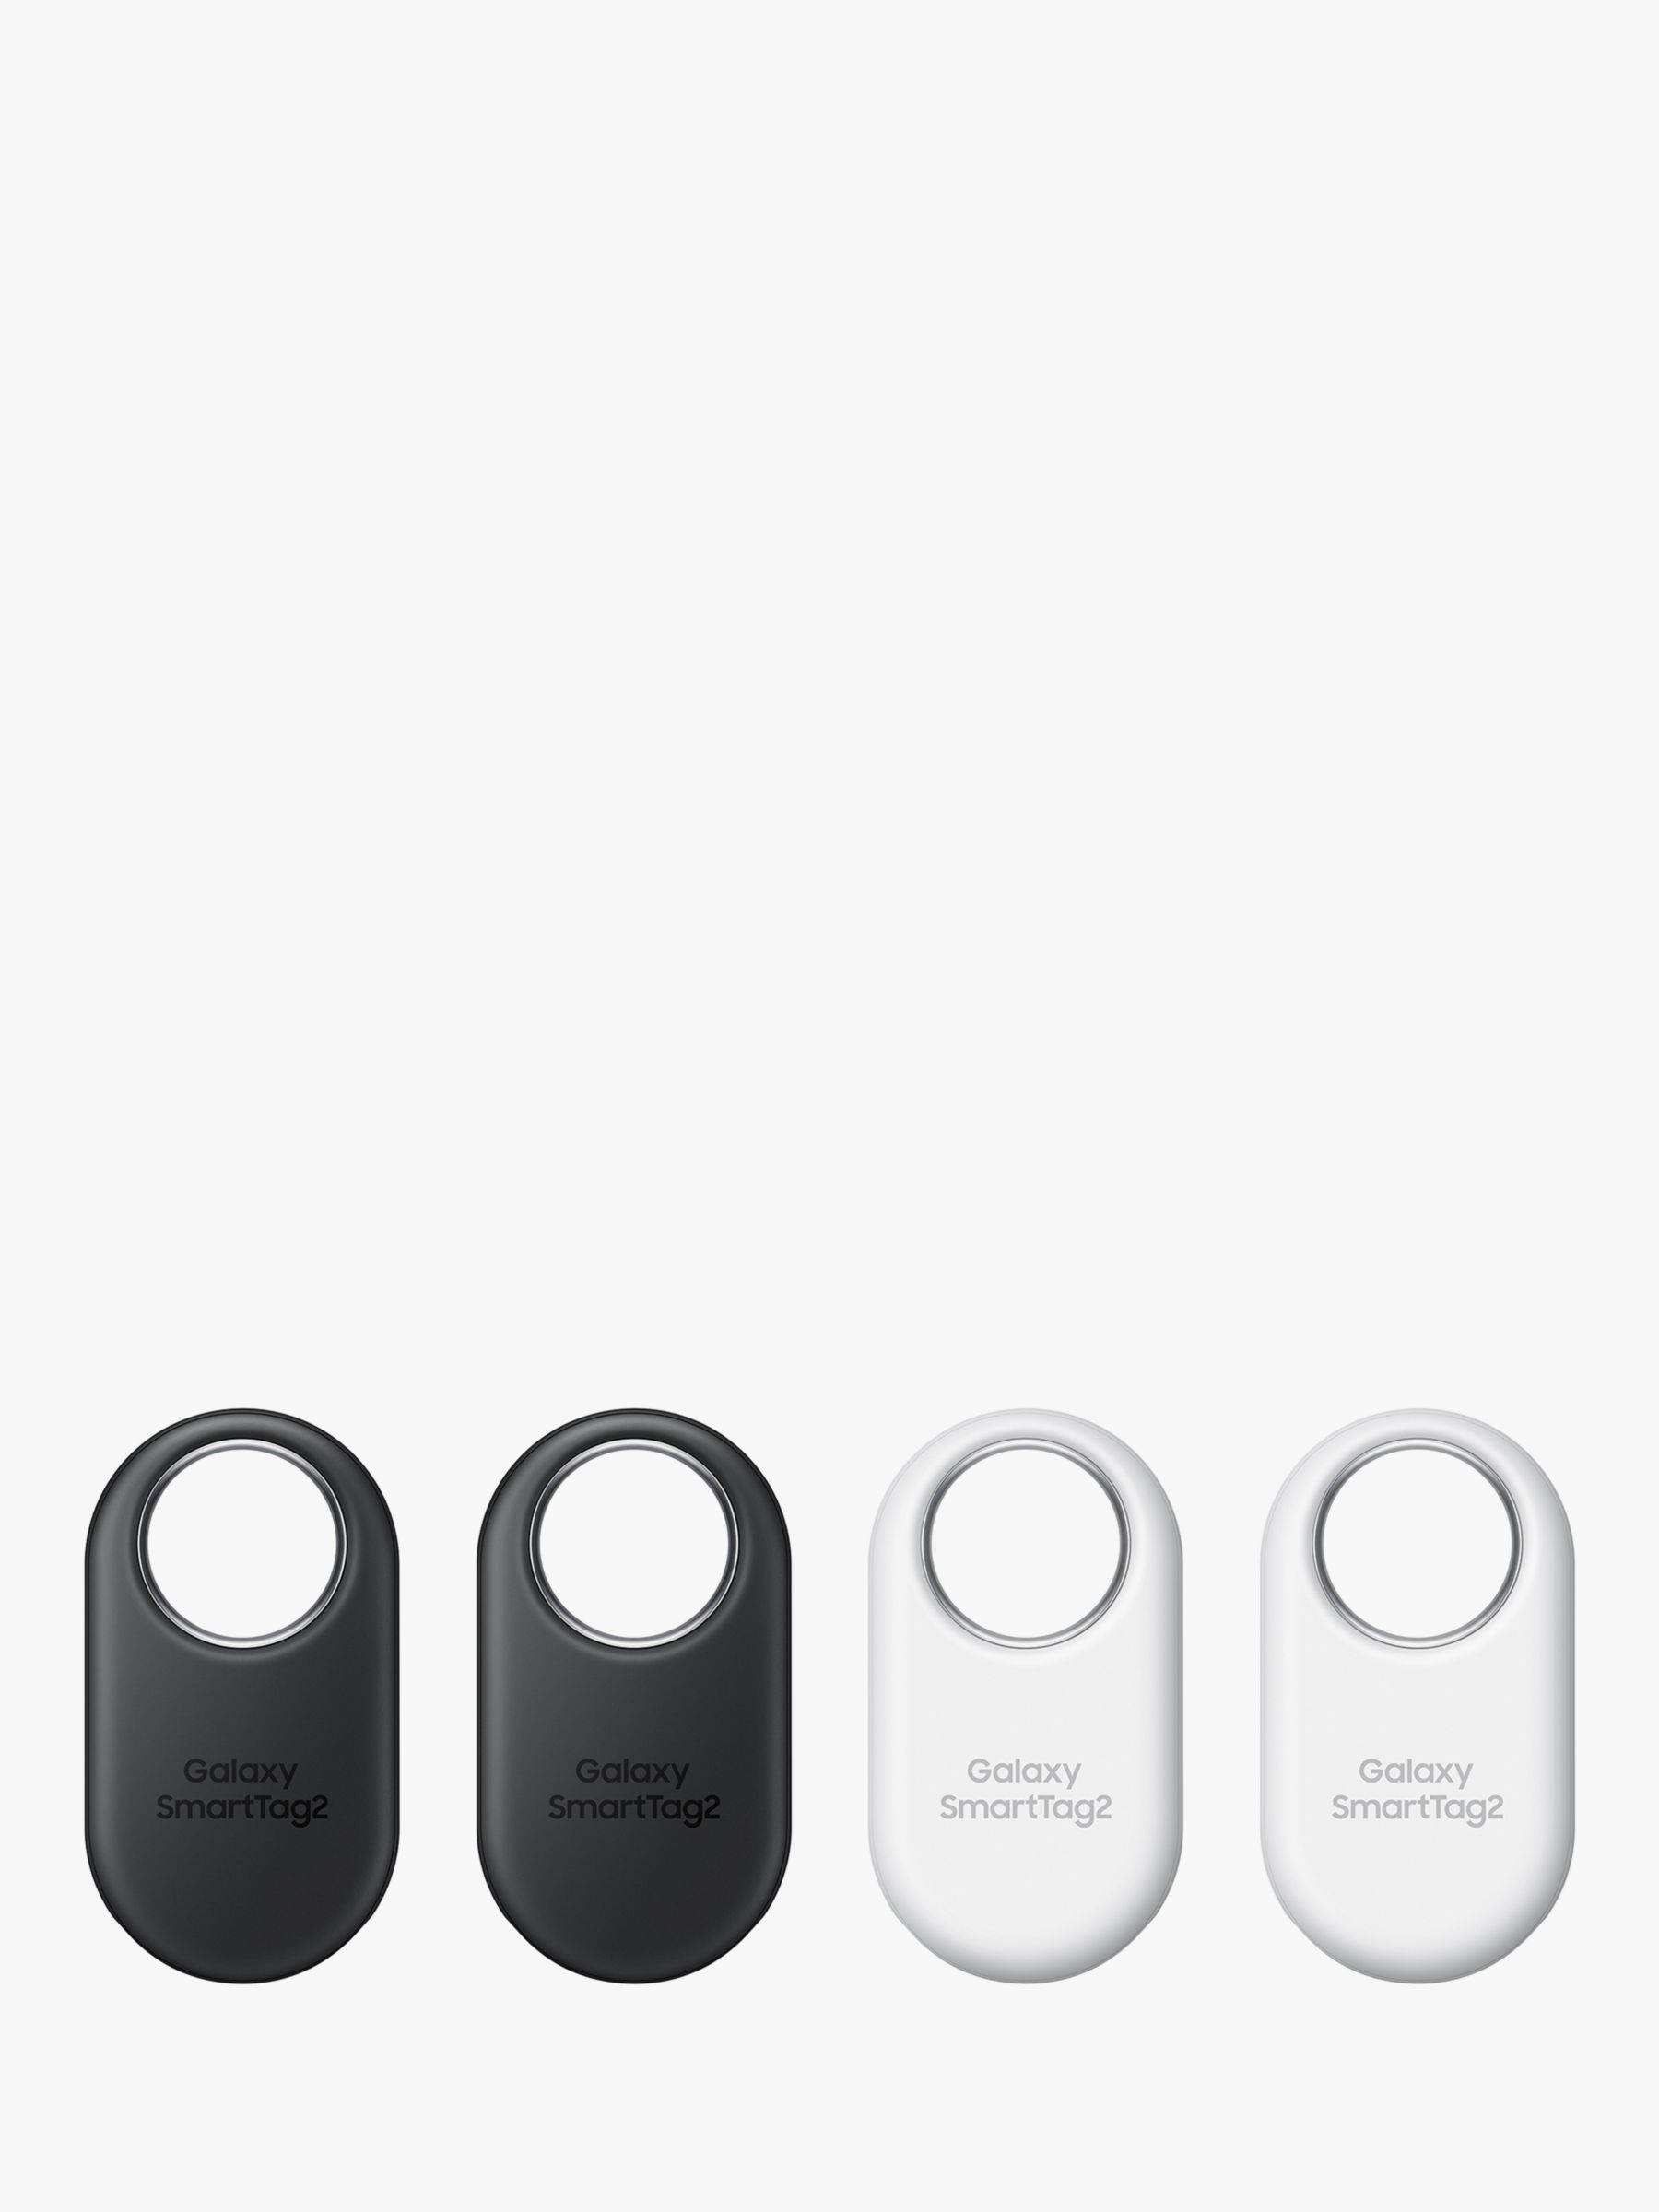 Samsung Galaxy SmartTag2 Bluetooth Tracker (1 Pack) with Compass View AR,  Find Lost Mode - Black 